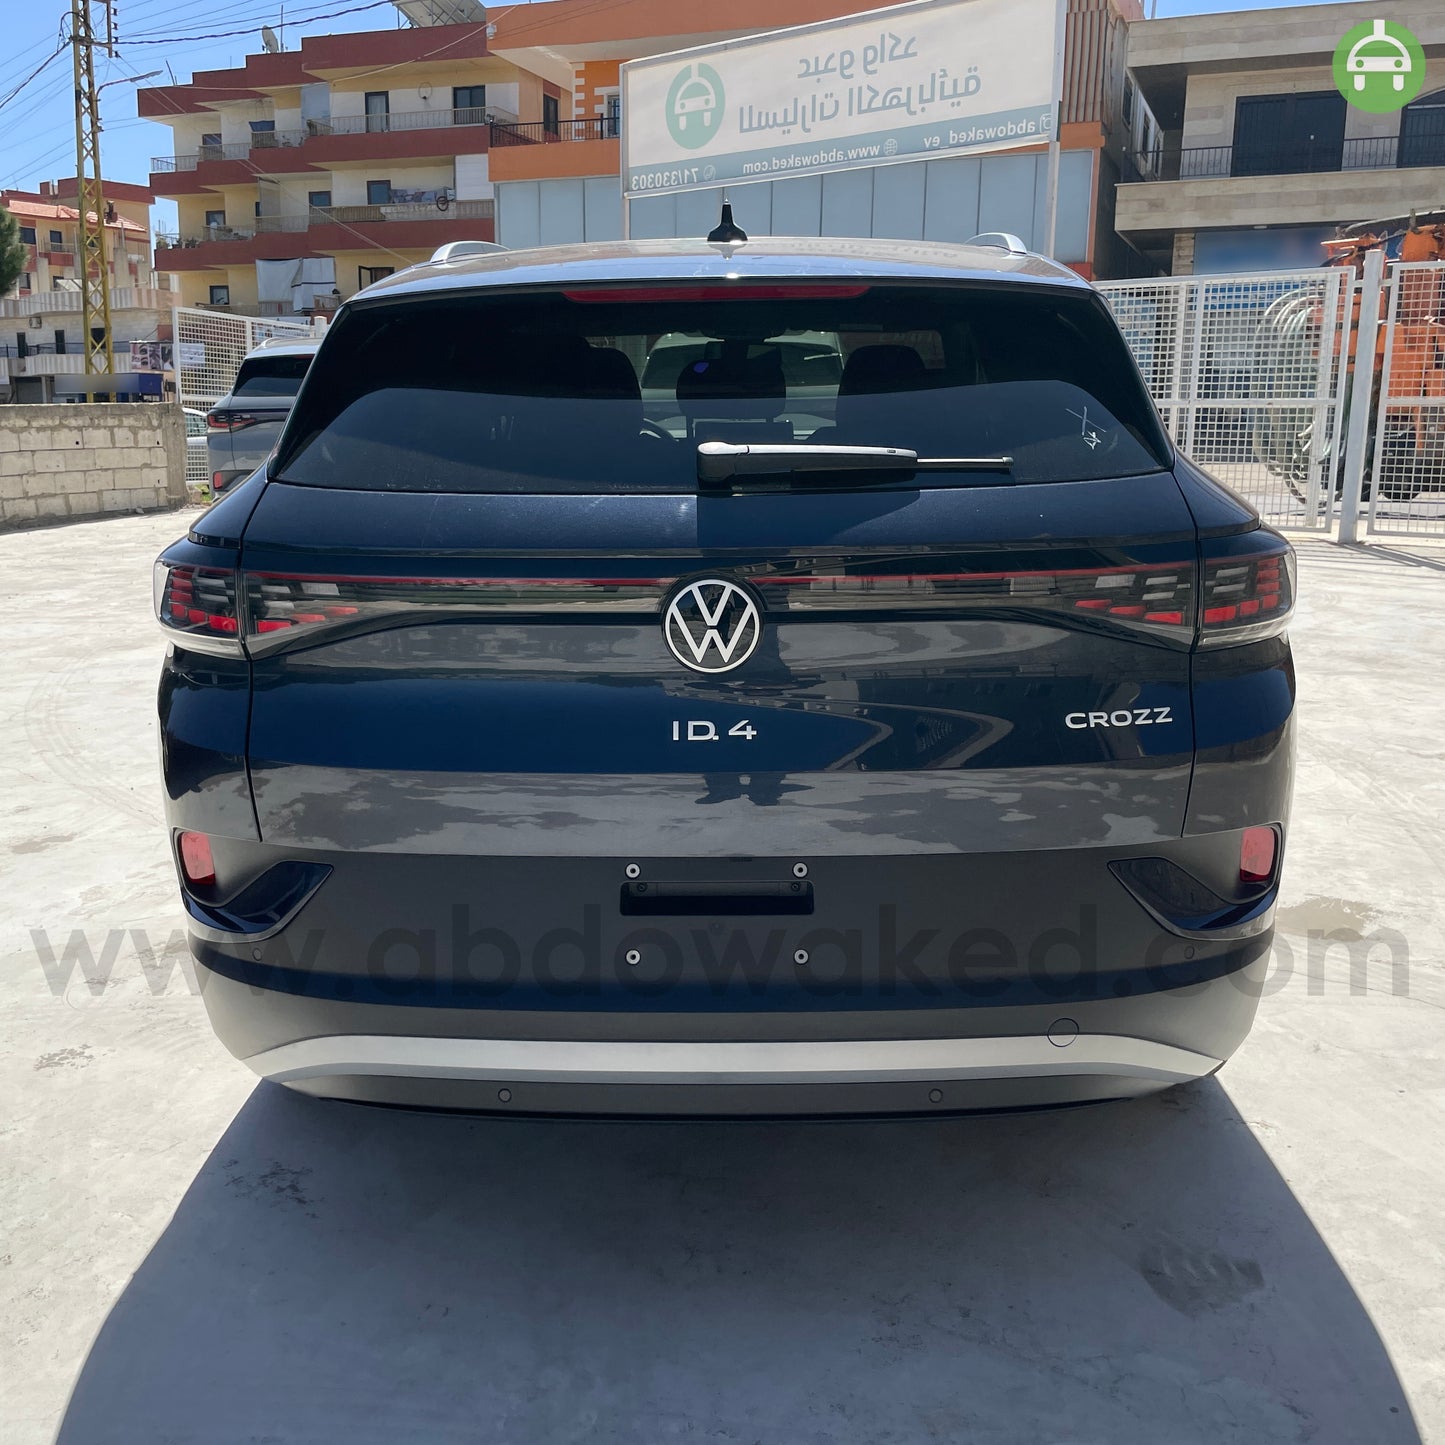 VW ID4 Crozz Pure+ 2022 Dark Blue Color 550km Range/Charge Fully Electric Car (New - 0KM)